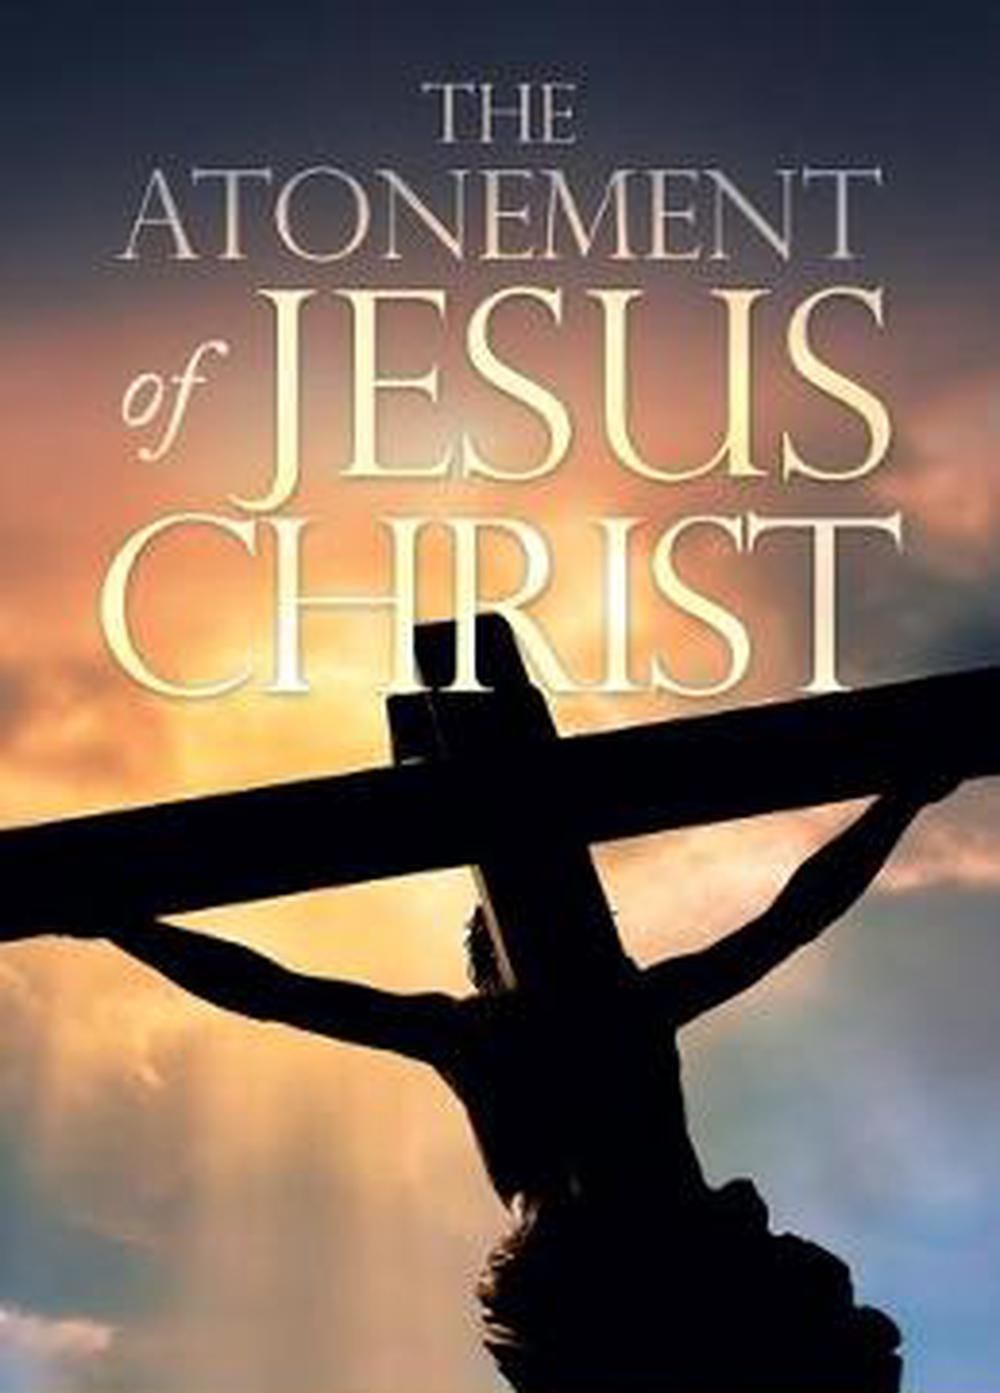 Arnold Atonement of Christ Redemption Applied